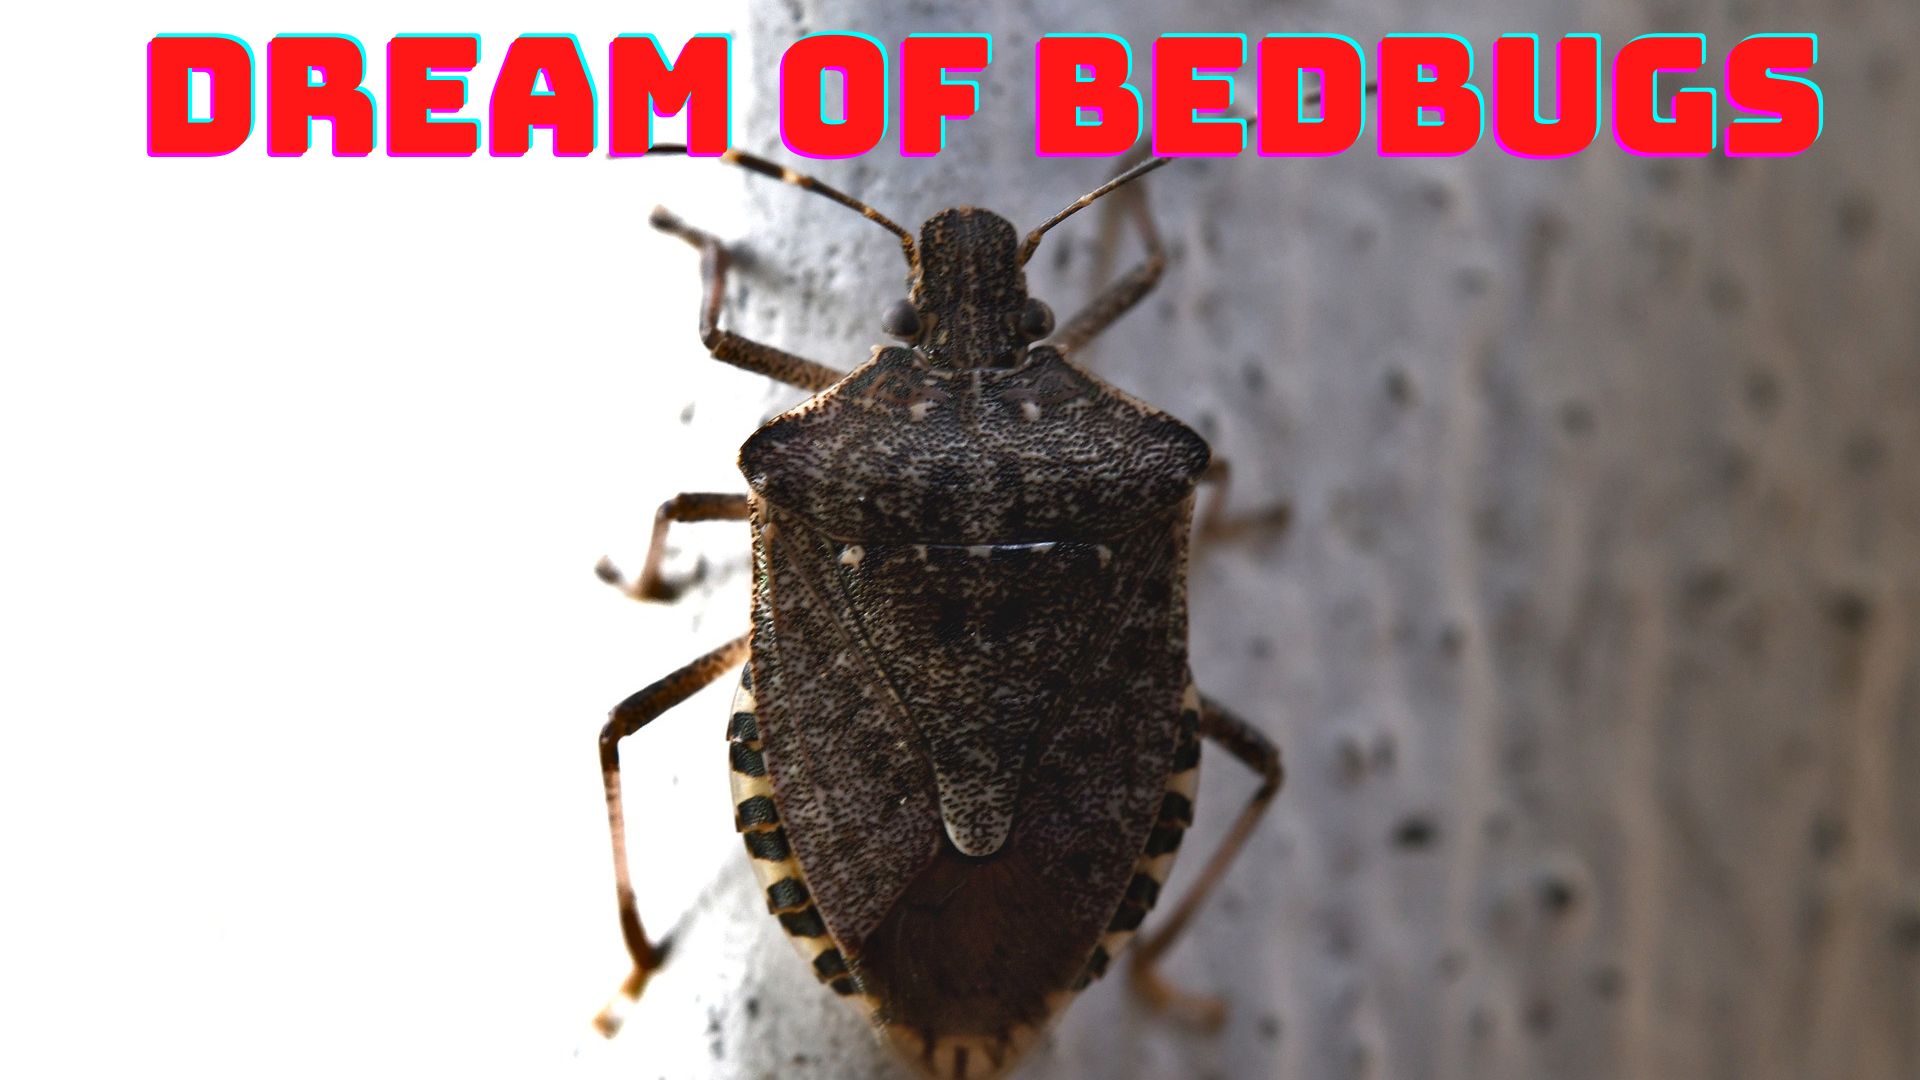 Dream Of Bedbugs - Experience An Embarrassing Situation